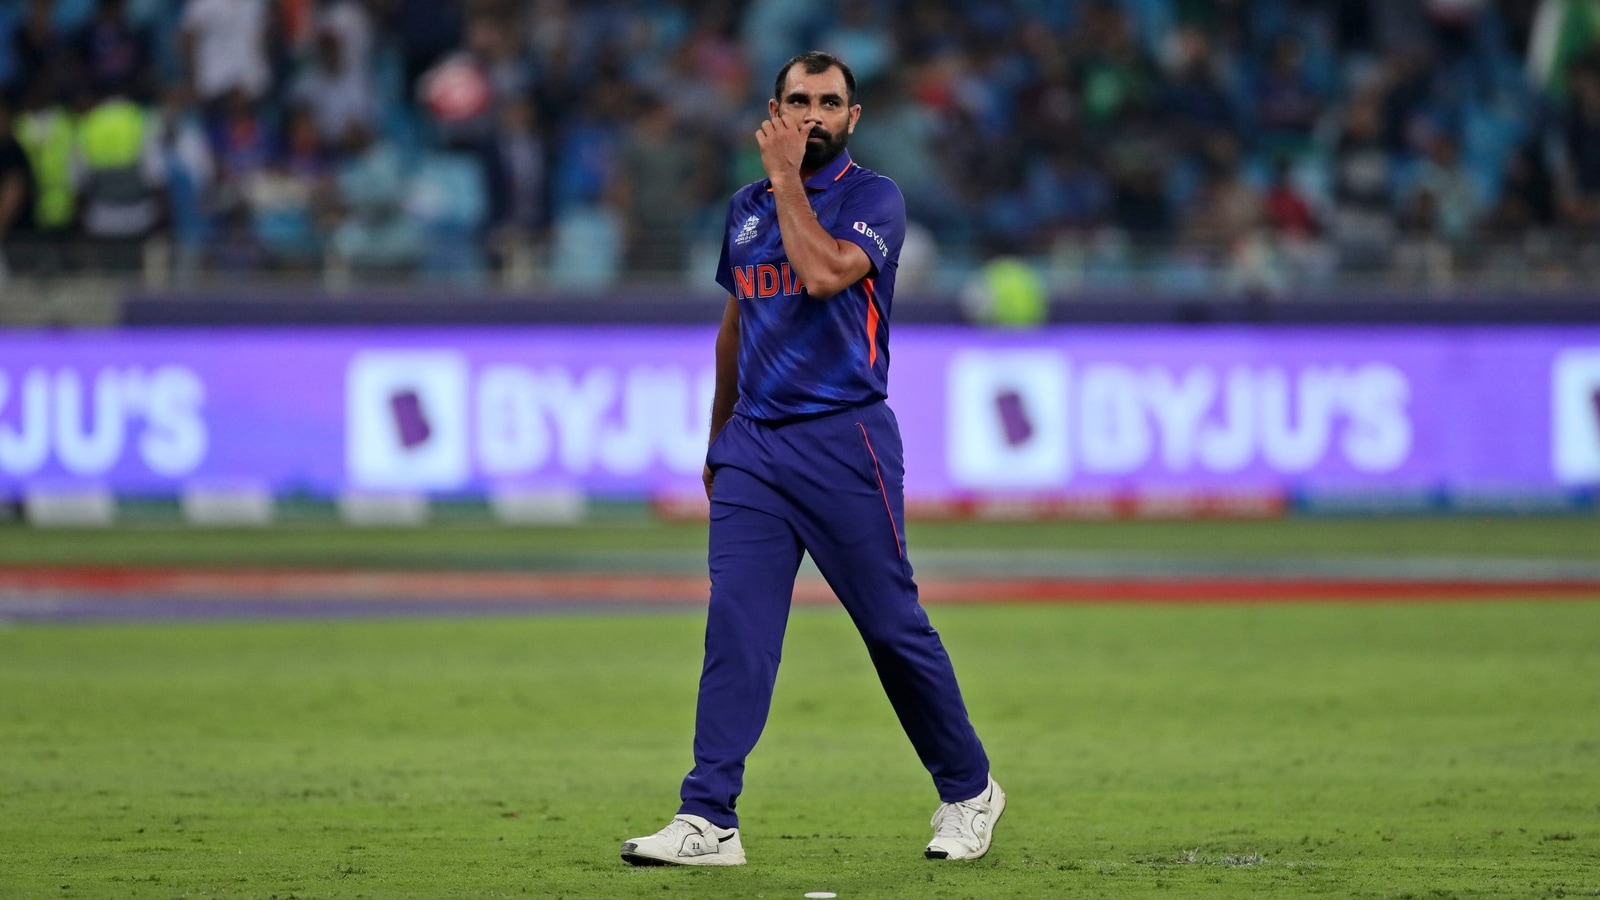 India Squad Asia CUP: Selectors tell Mohammed Shami, 'Only be considered for Tests & ODIs', Washington Sundar, Asia Cup 2022, T20 World Cup